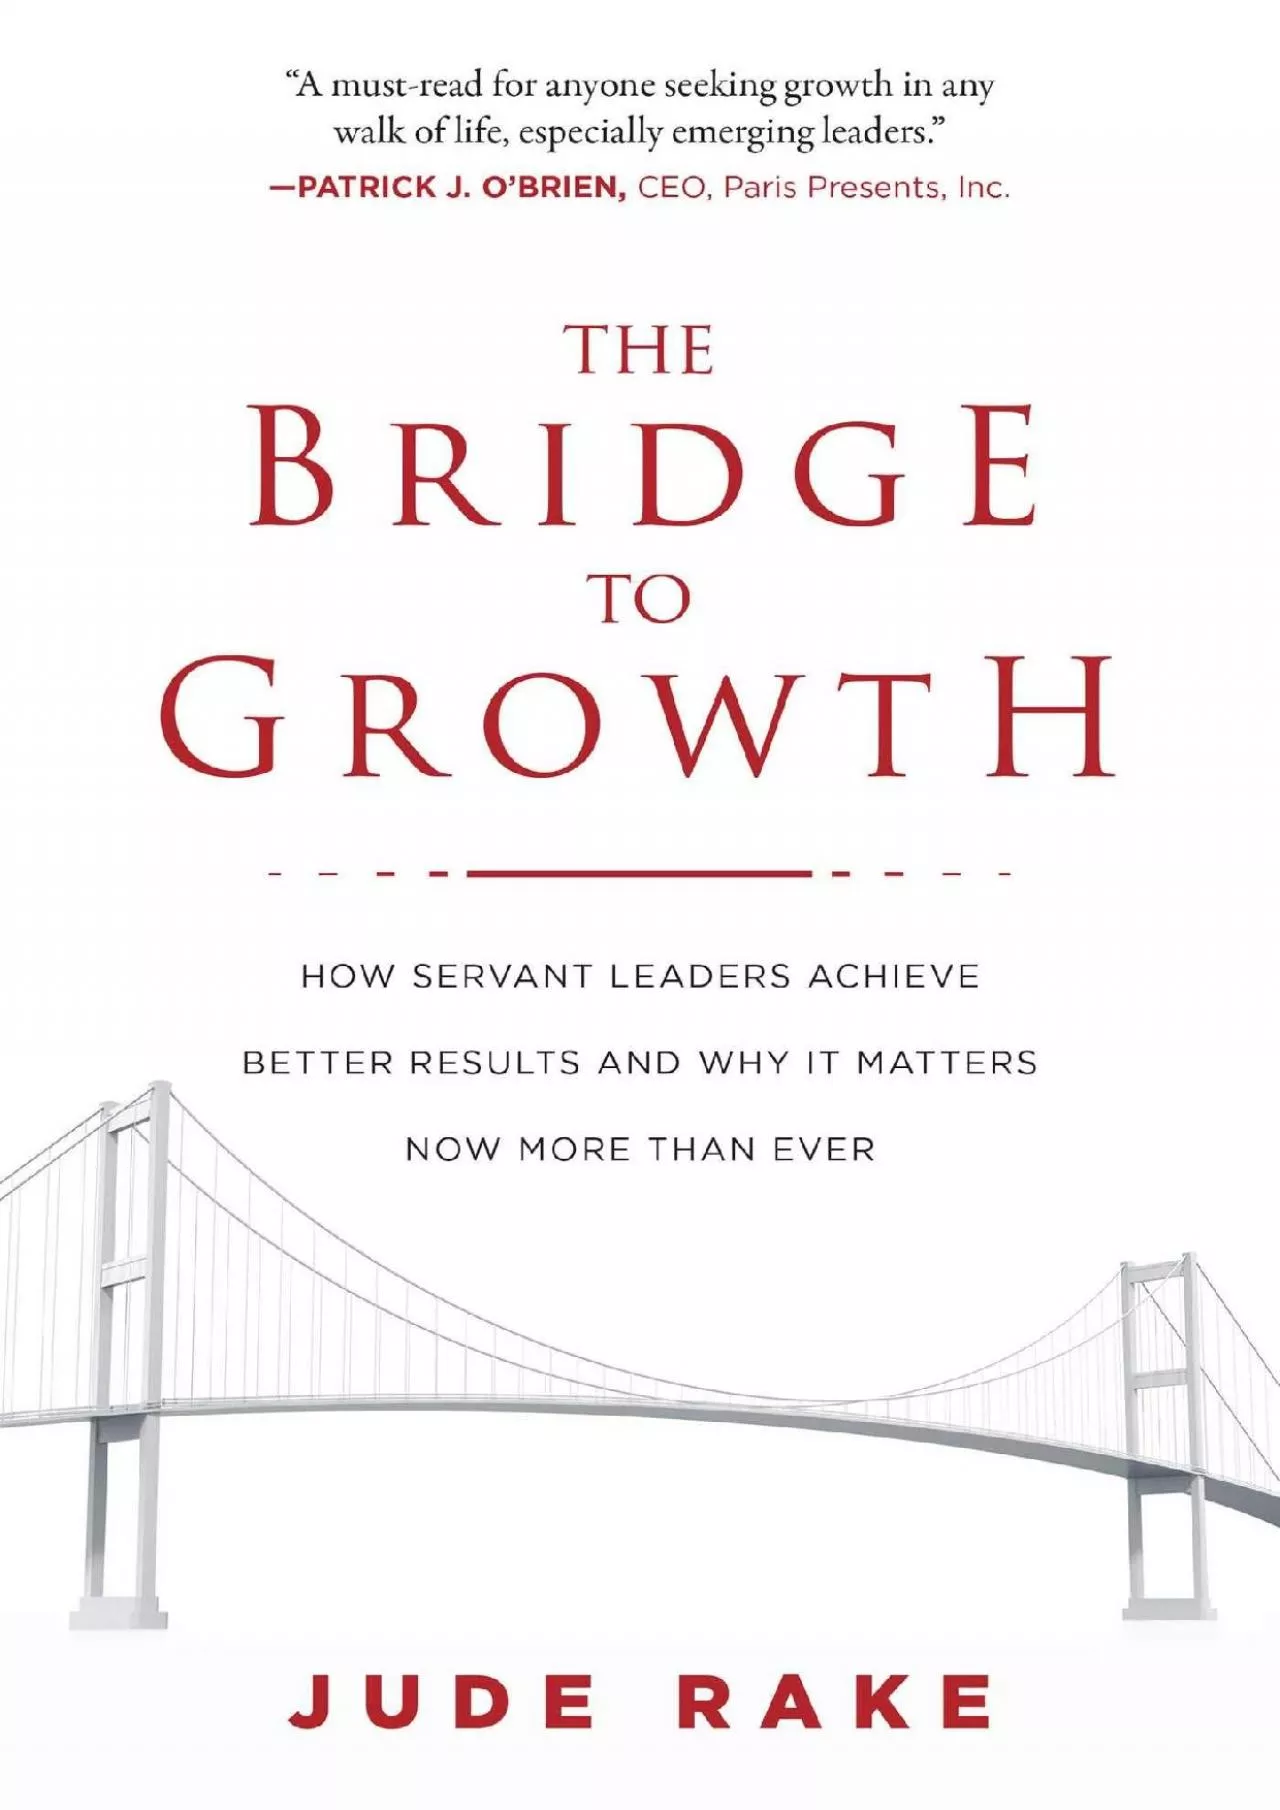 The Bridge to Growth: How Servant Leaders Achieve Better Results and Why It Matters Now